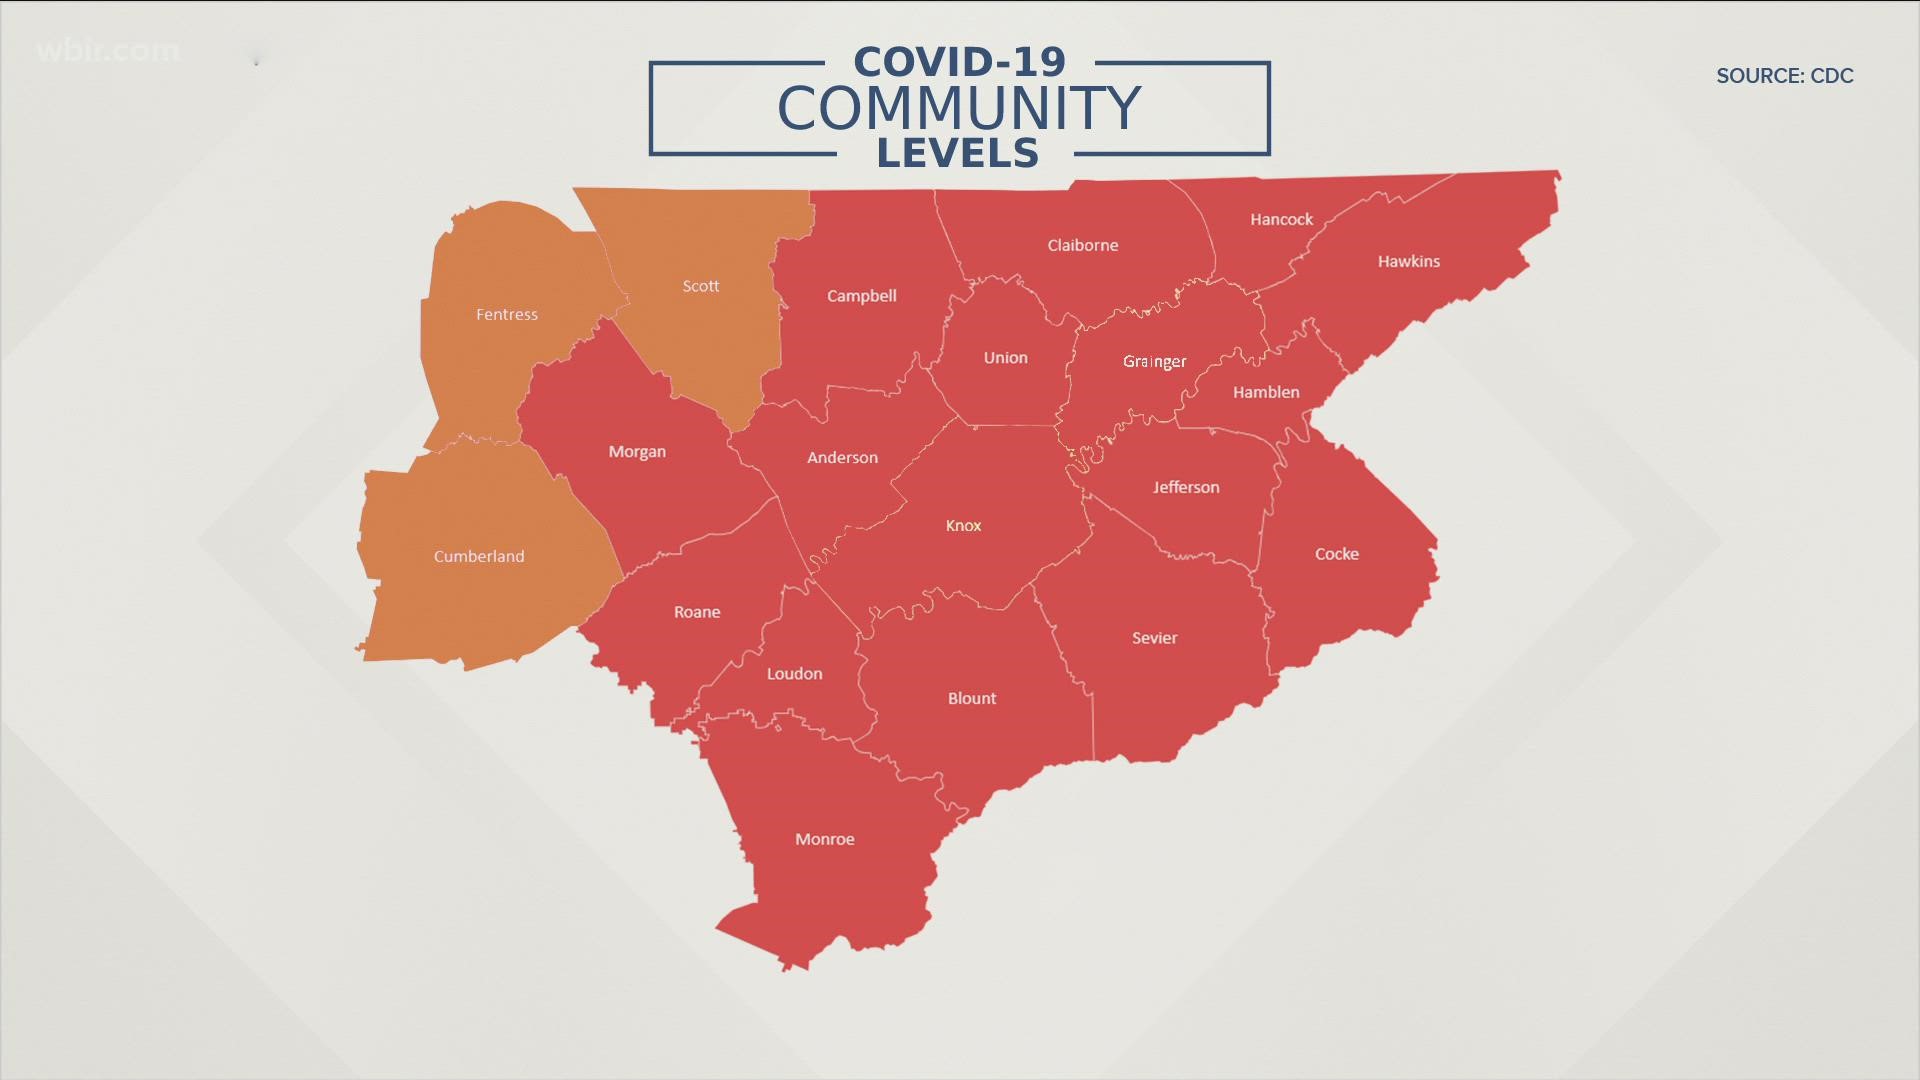 The agency is still advising that people, including schoolchildren, wear masks where the risk of COVID is high. That's still the situation for East TN currently.